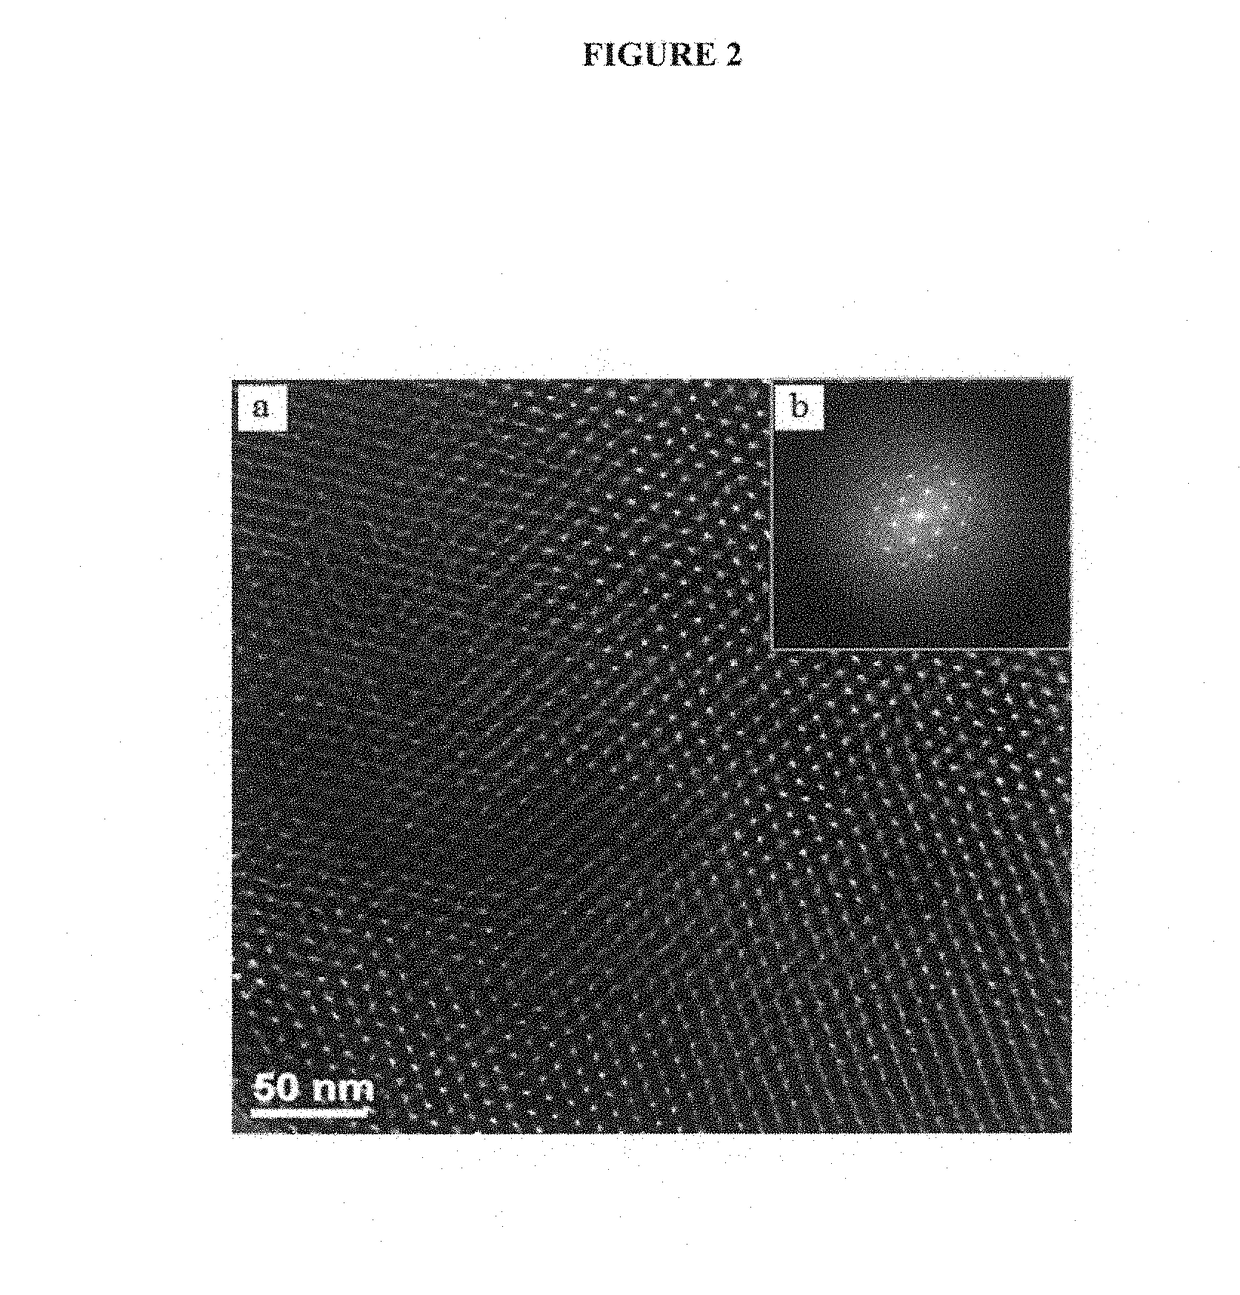 Porous Calcium-Silicates and Method of Synthesis